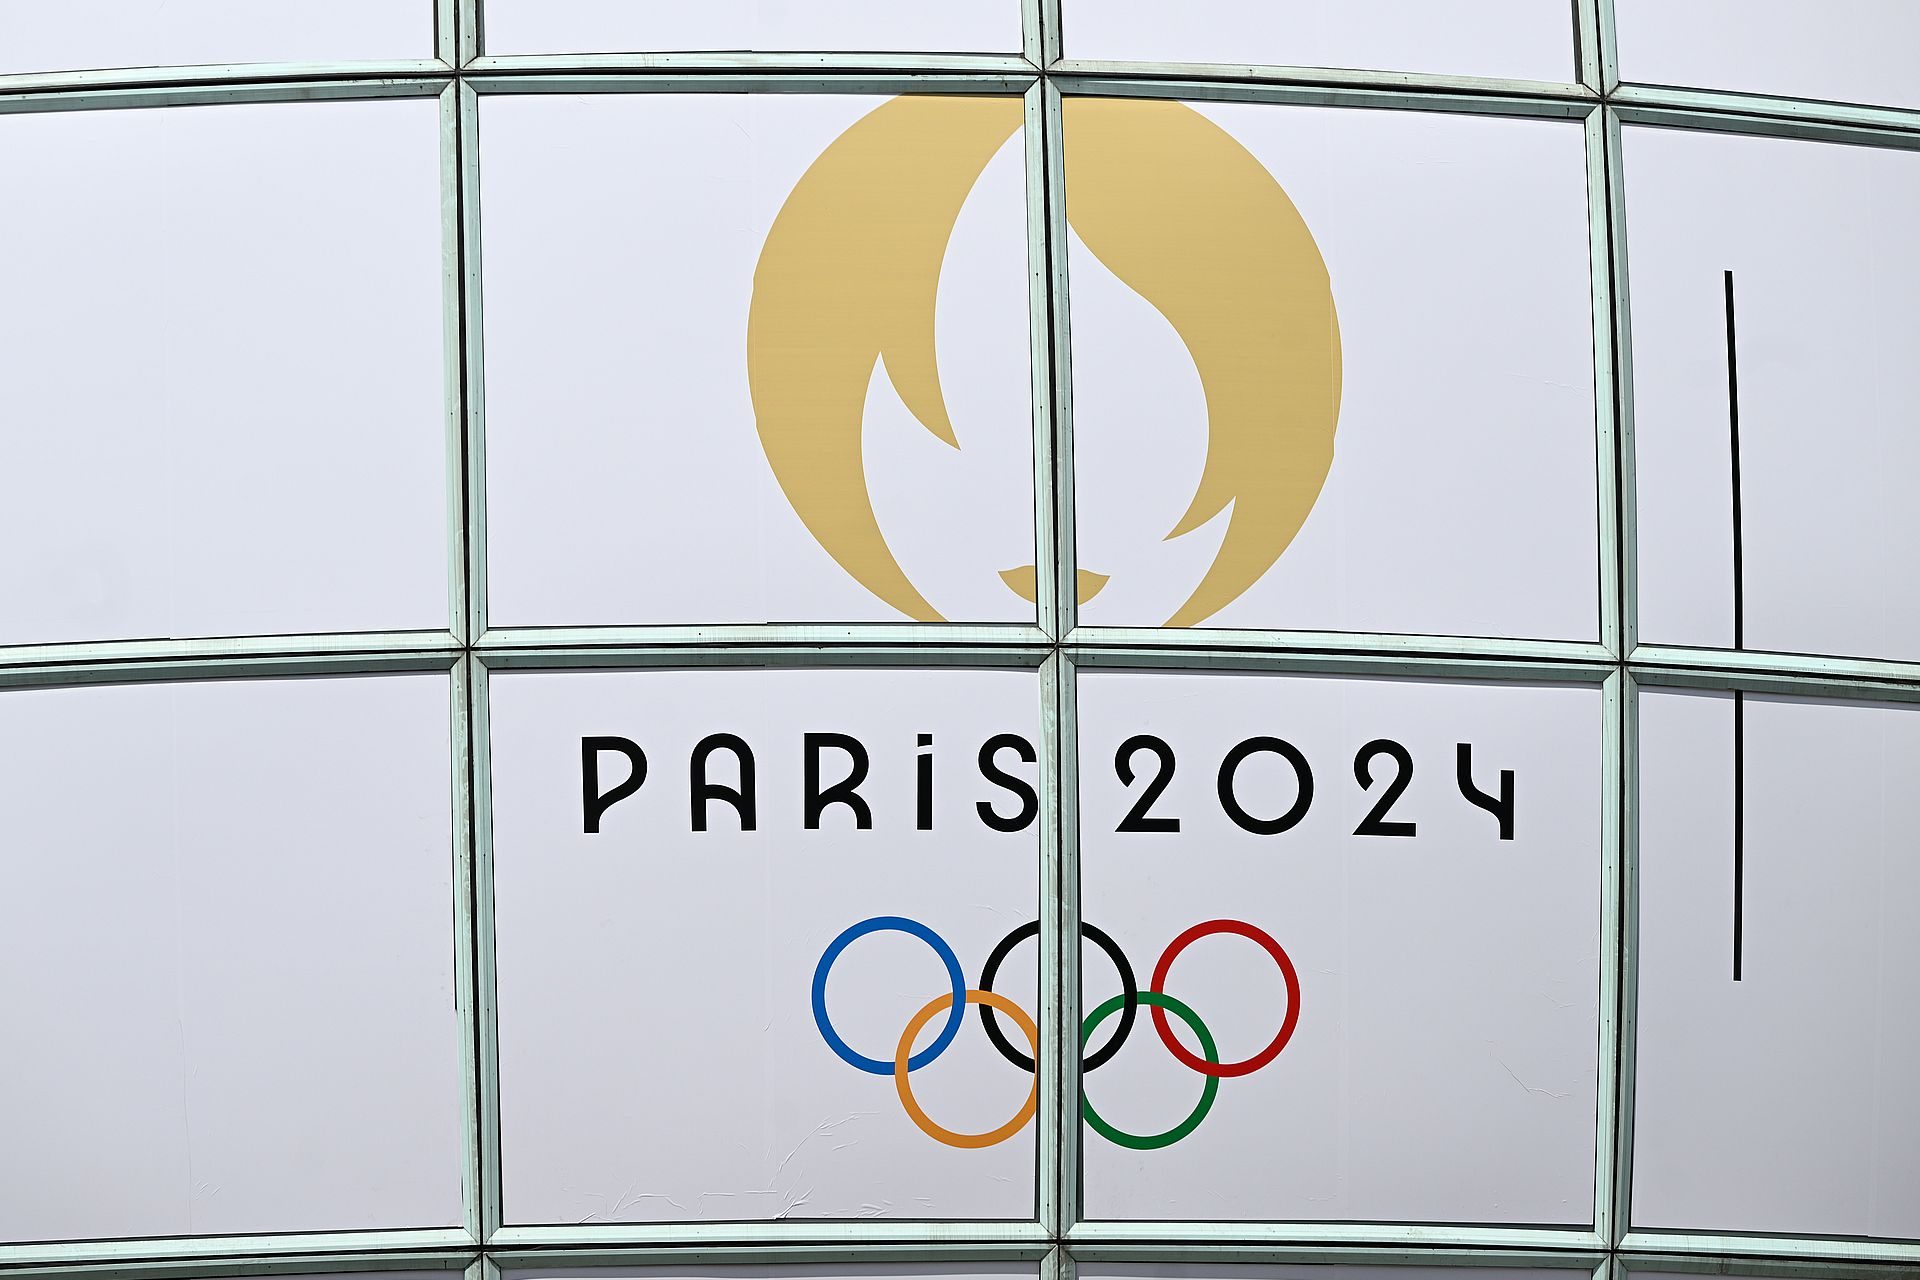 How France made Paris 2024 the cheapest Olympics ever